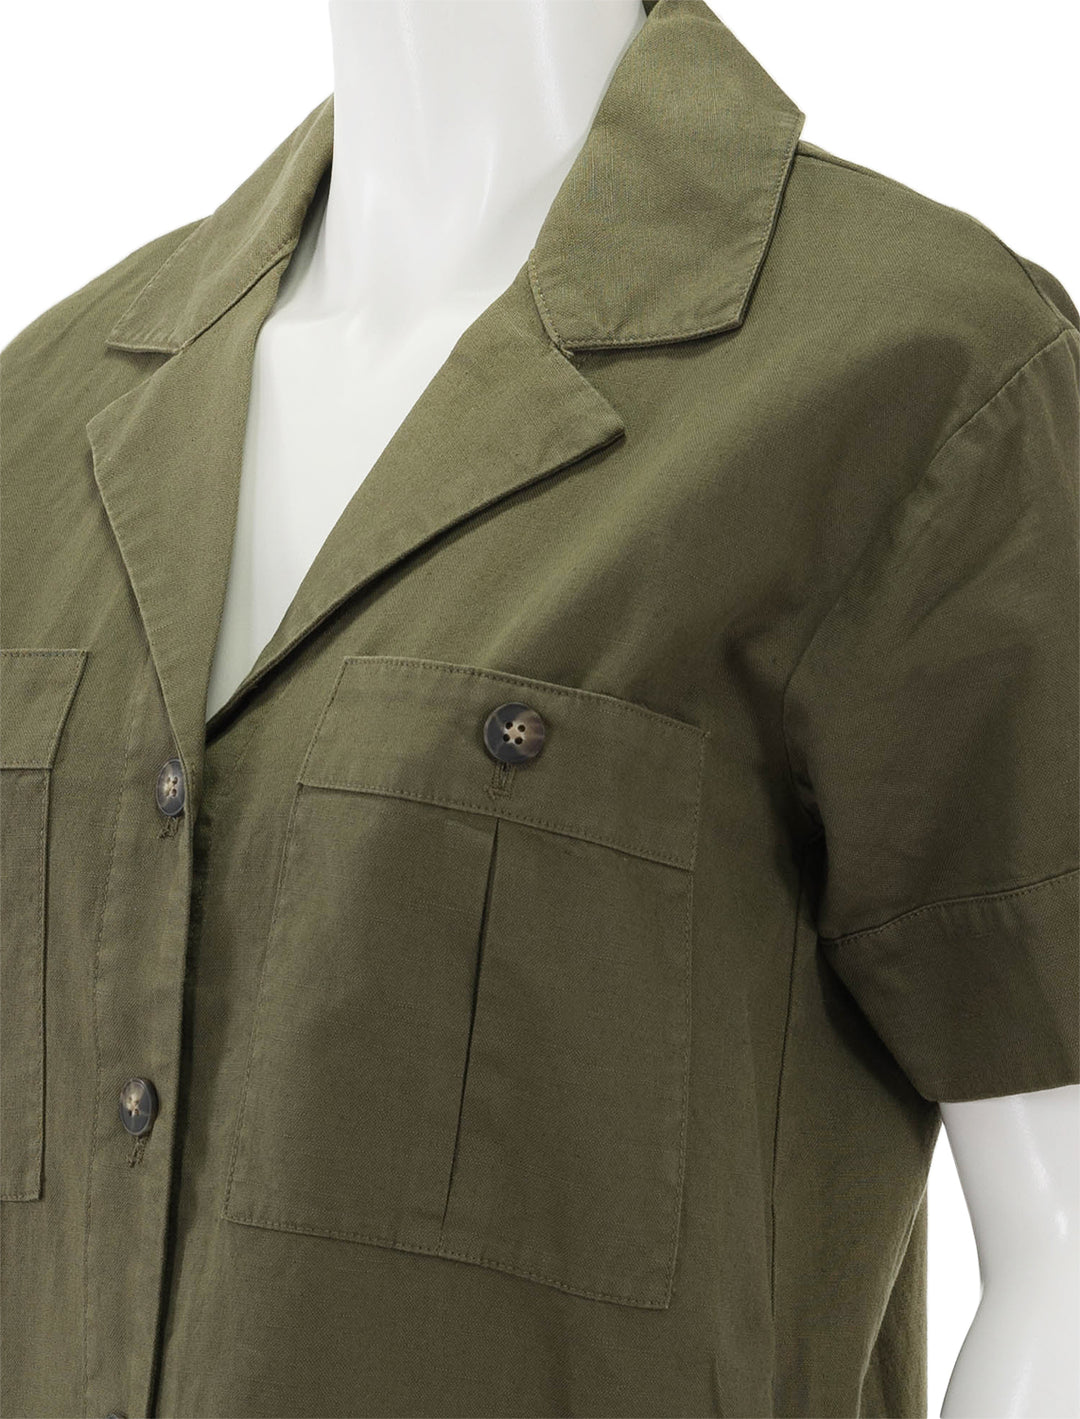 Close-up view of Faherty's palos verdes dress in military olive.